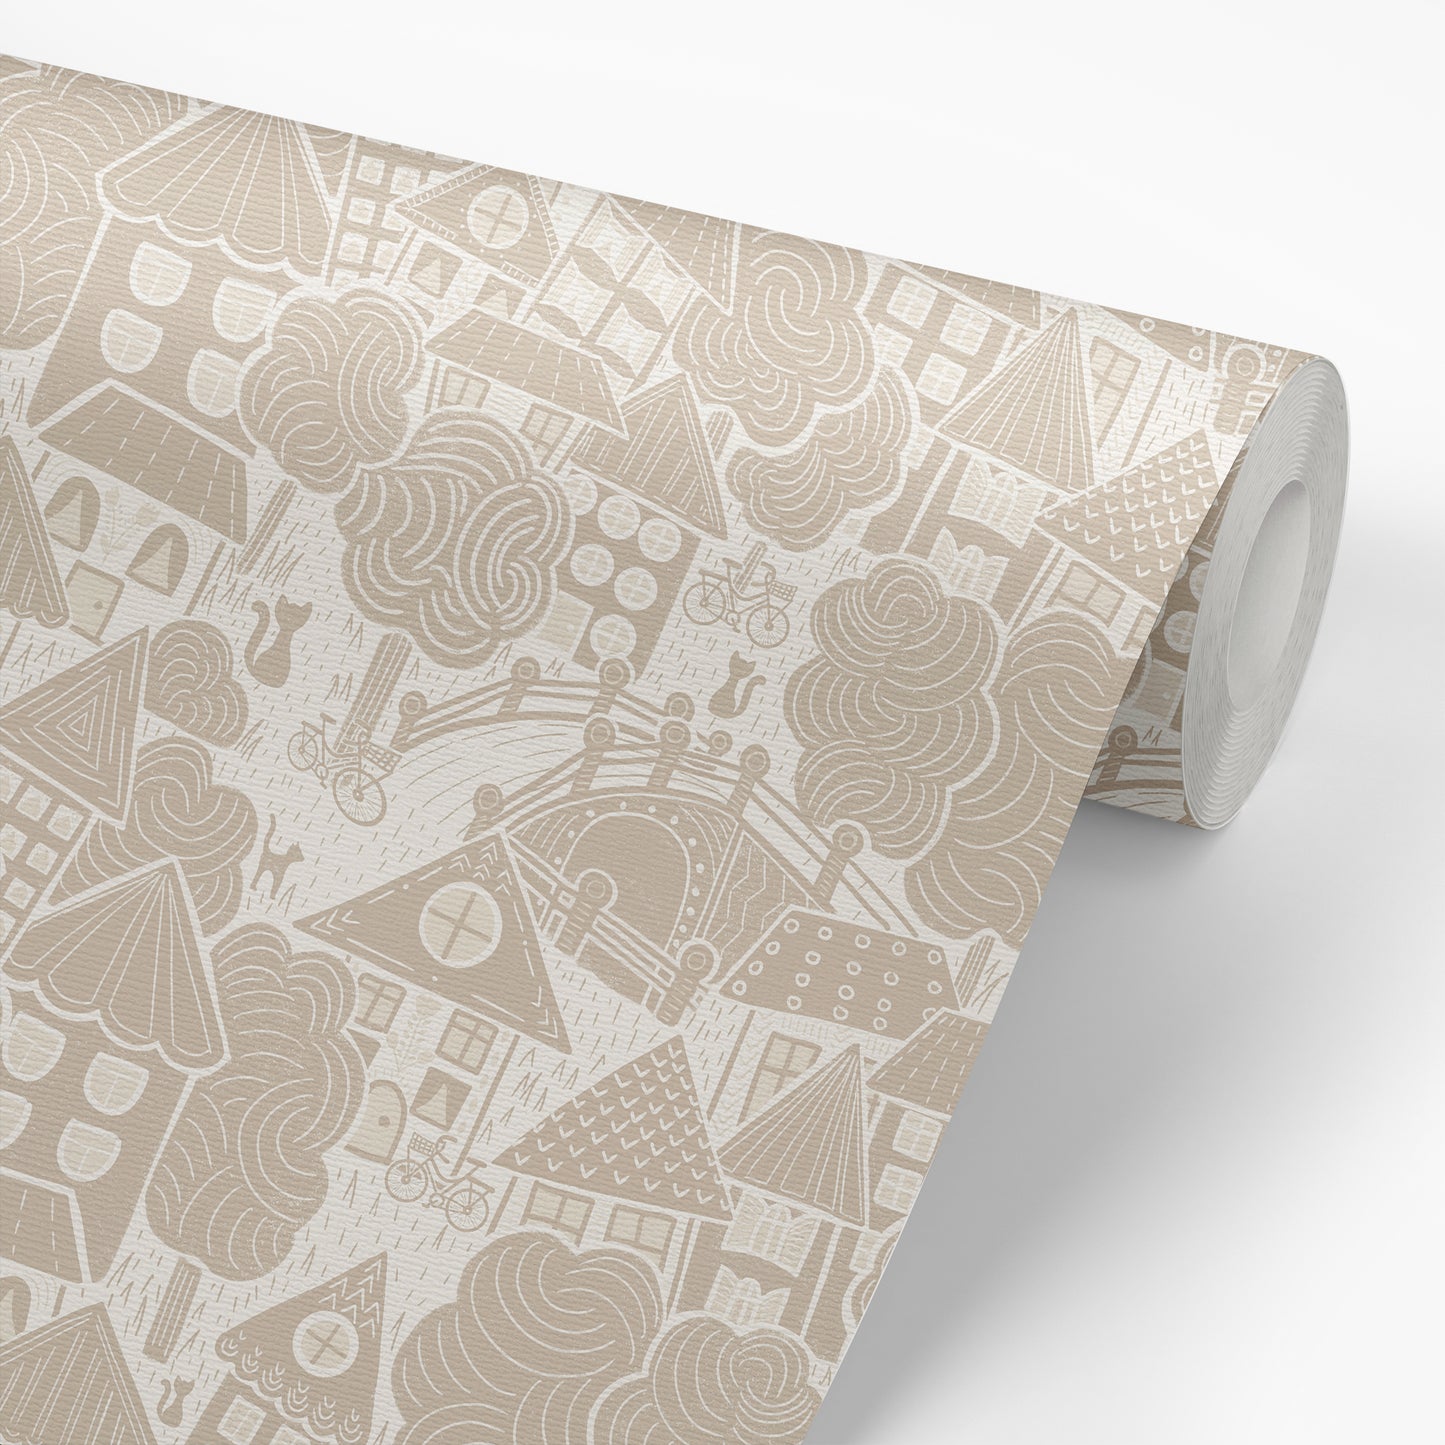 Houses Wallpaper in Taupe shown on a roll of wallpaper.